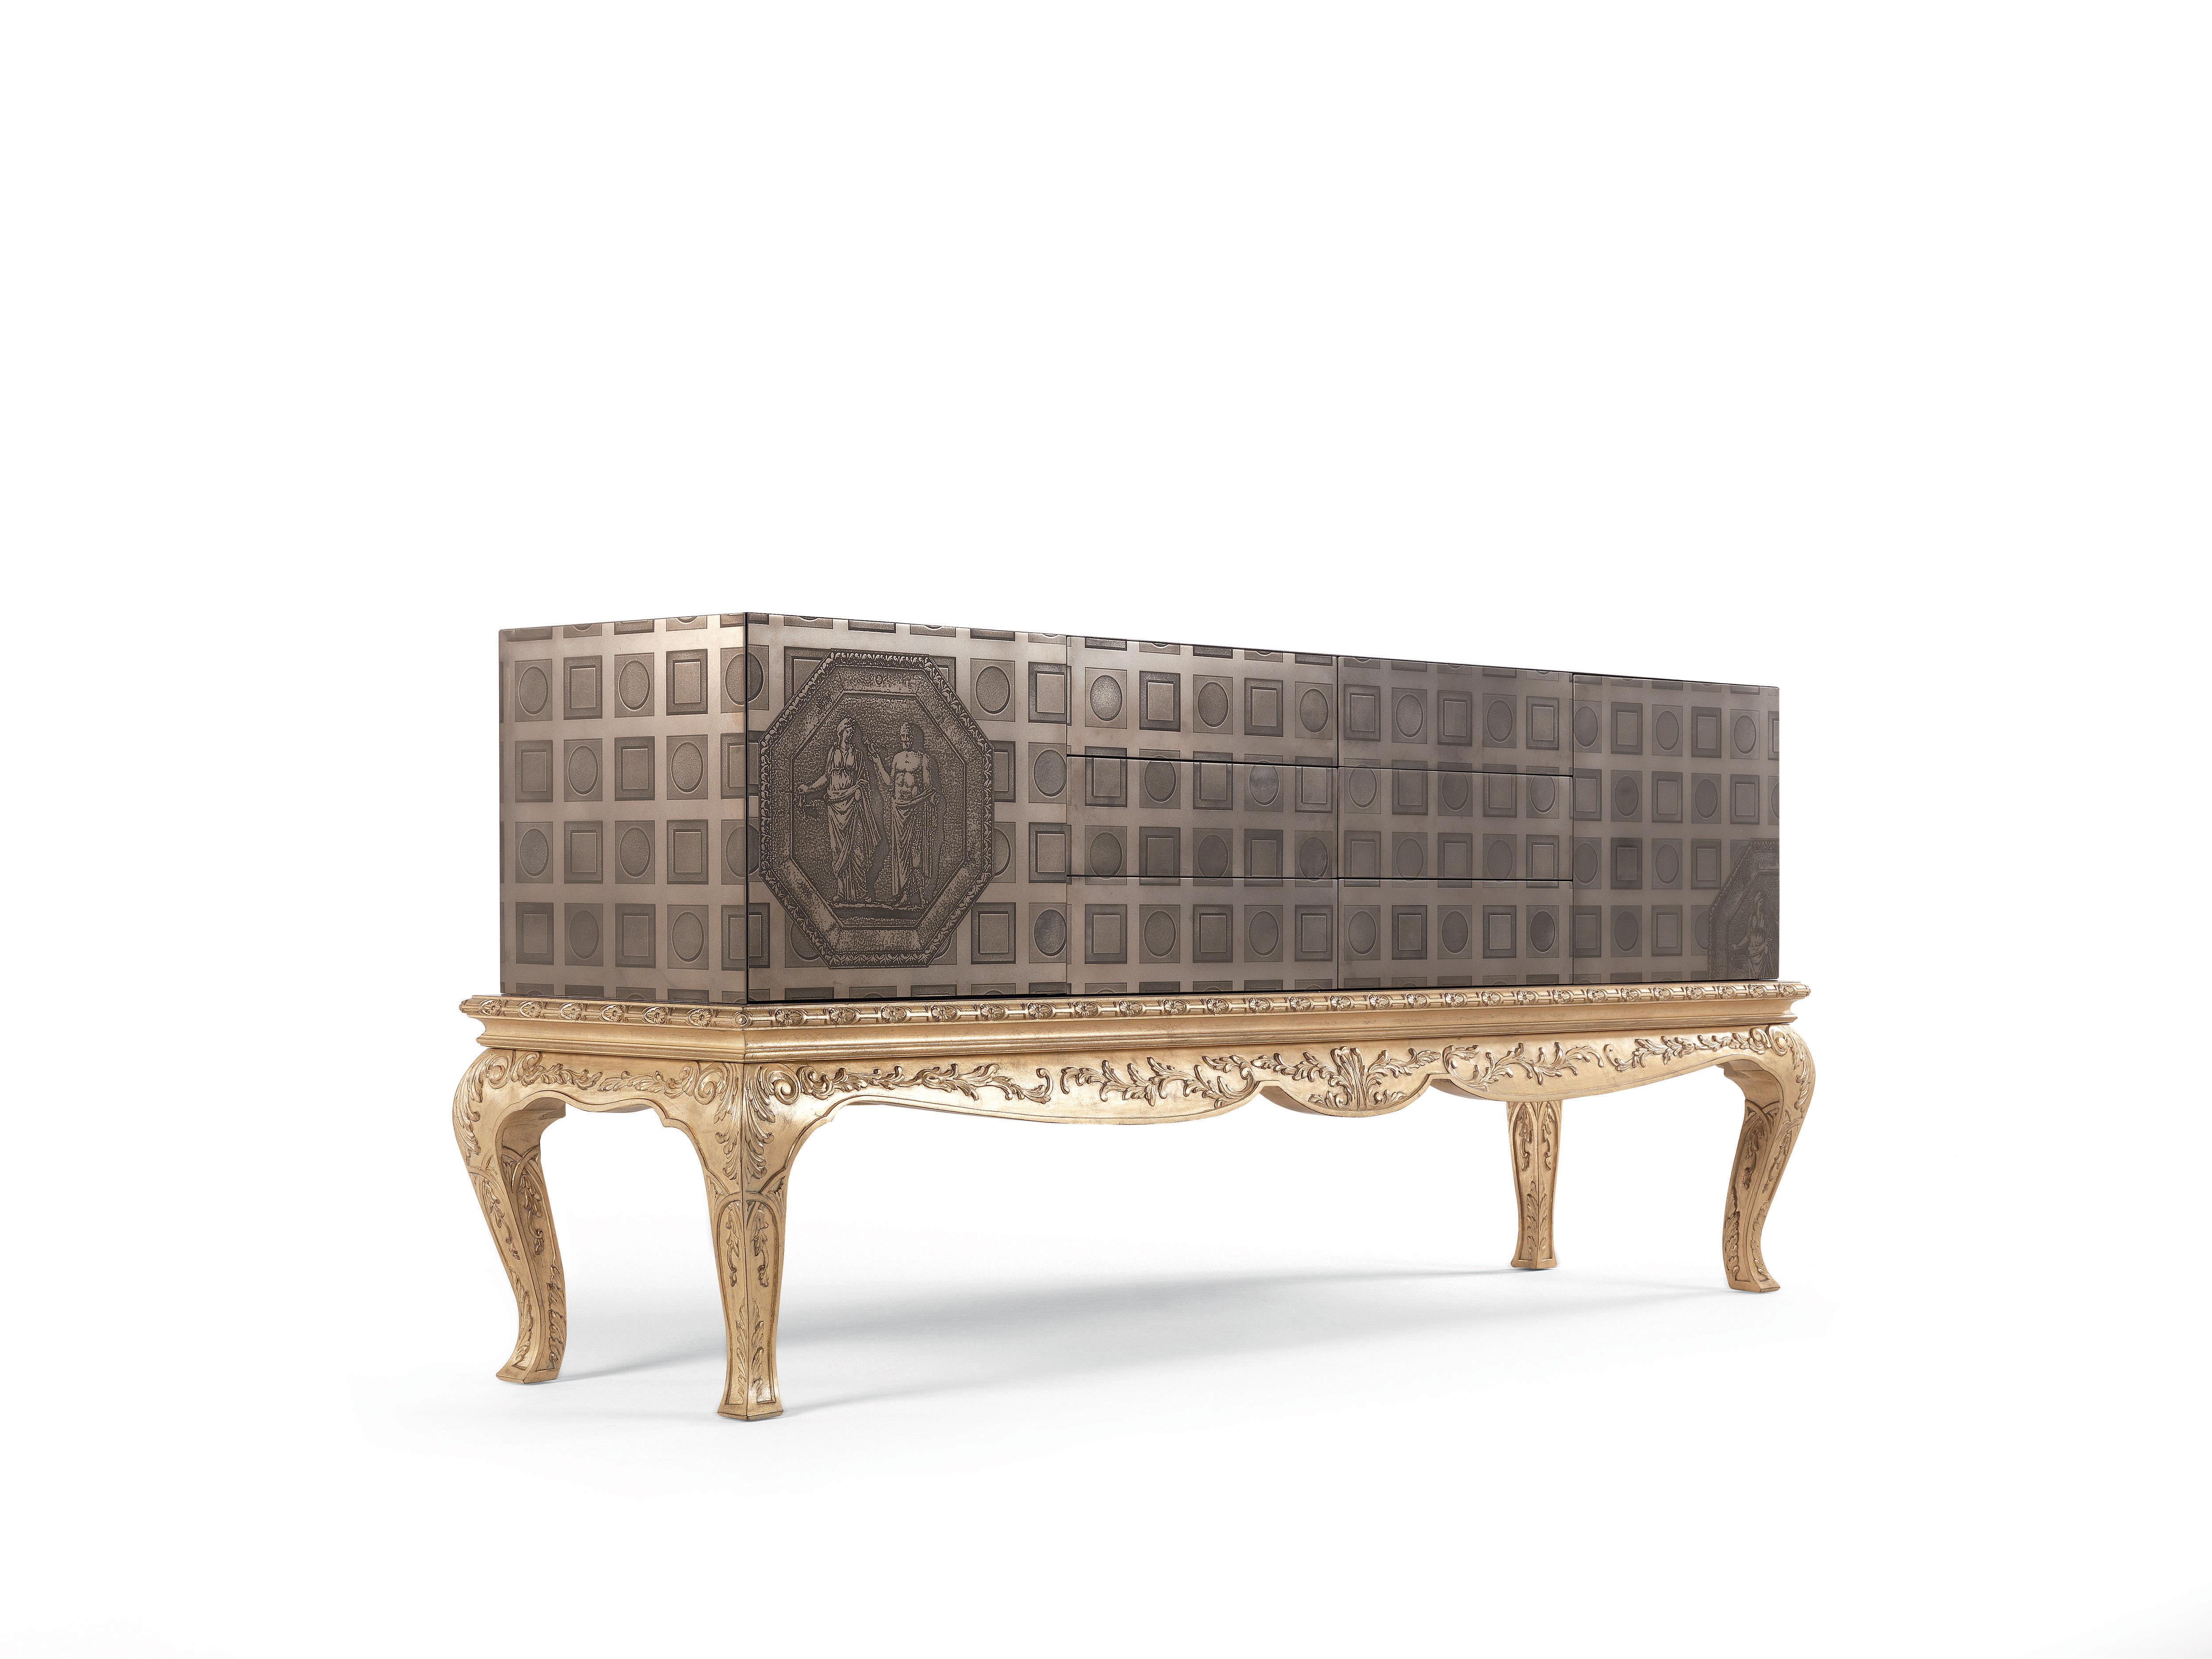 Fragonard line expresses Jumbo Collection’s design approach, where artisanal heritage, decorative and experimentation in the use of materials, techniques and processes meet. In the Fragonard sideboard, the base is highlighted by the very antiqued